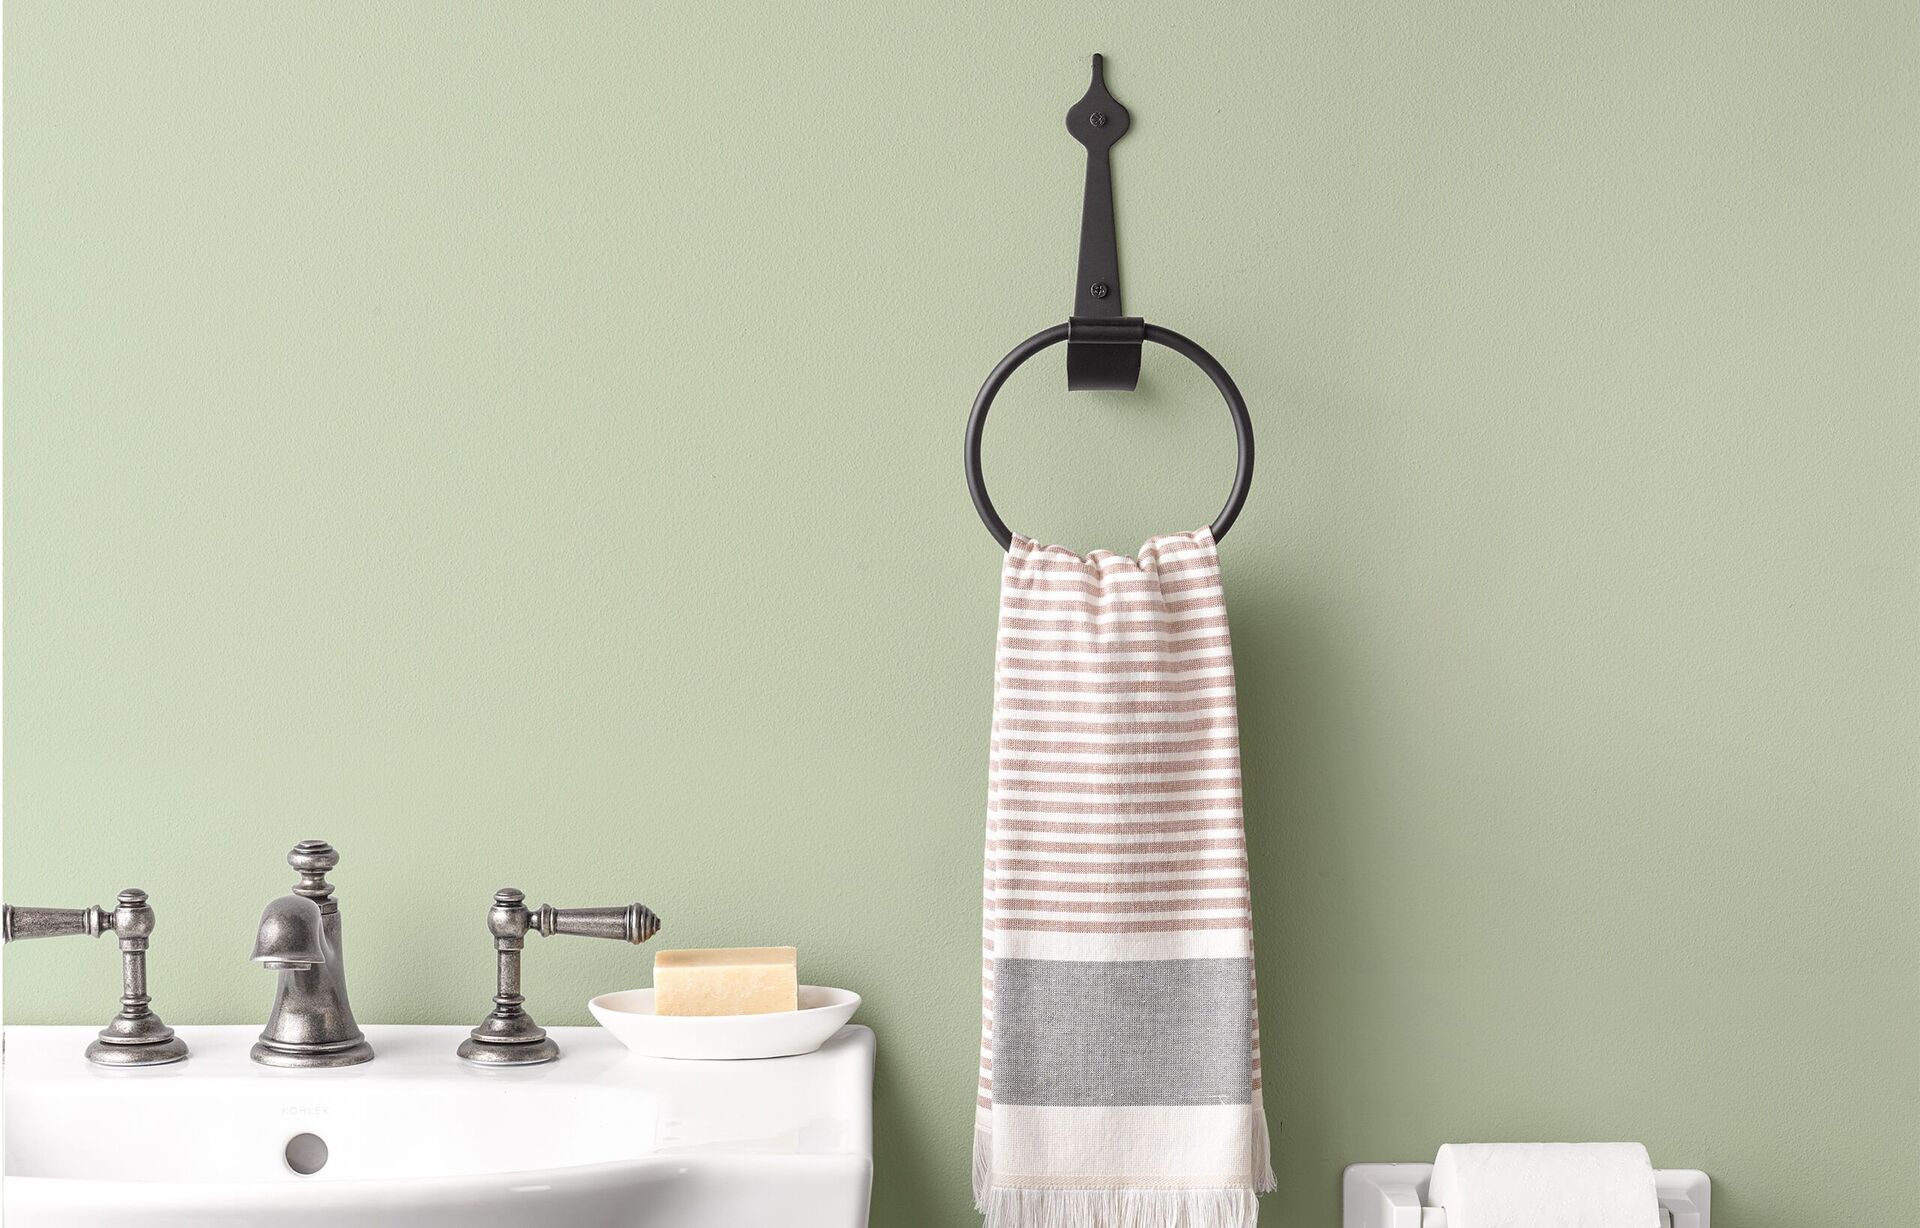 Where To Hang Towel Ring In Small Bathroom With Pedestal Sink | Storables